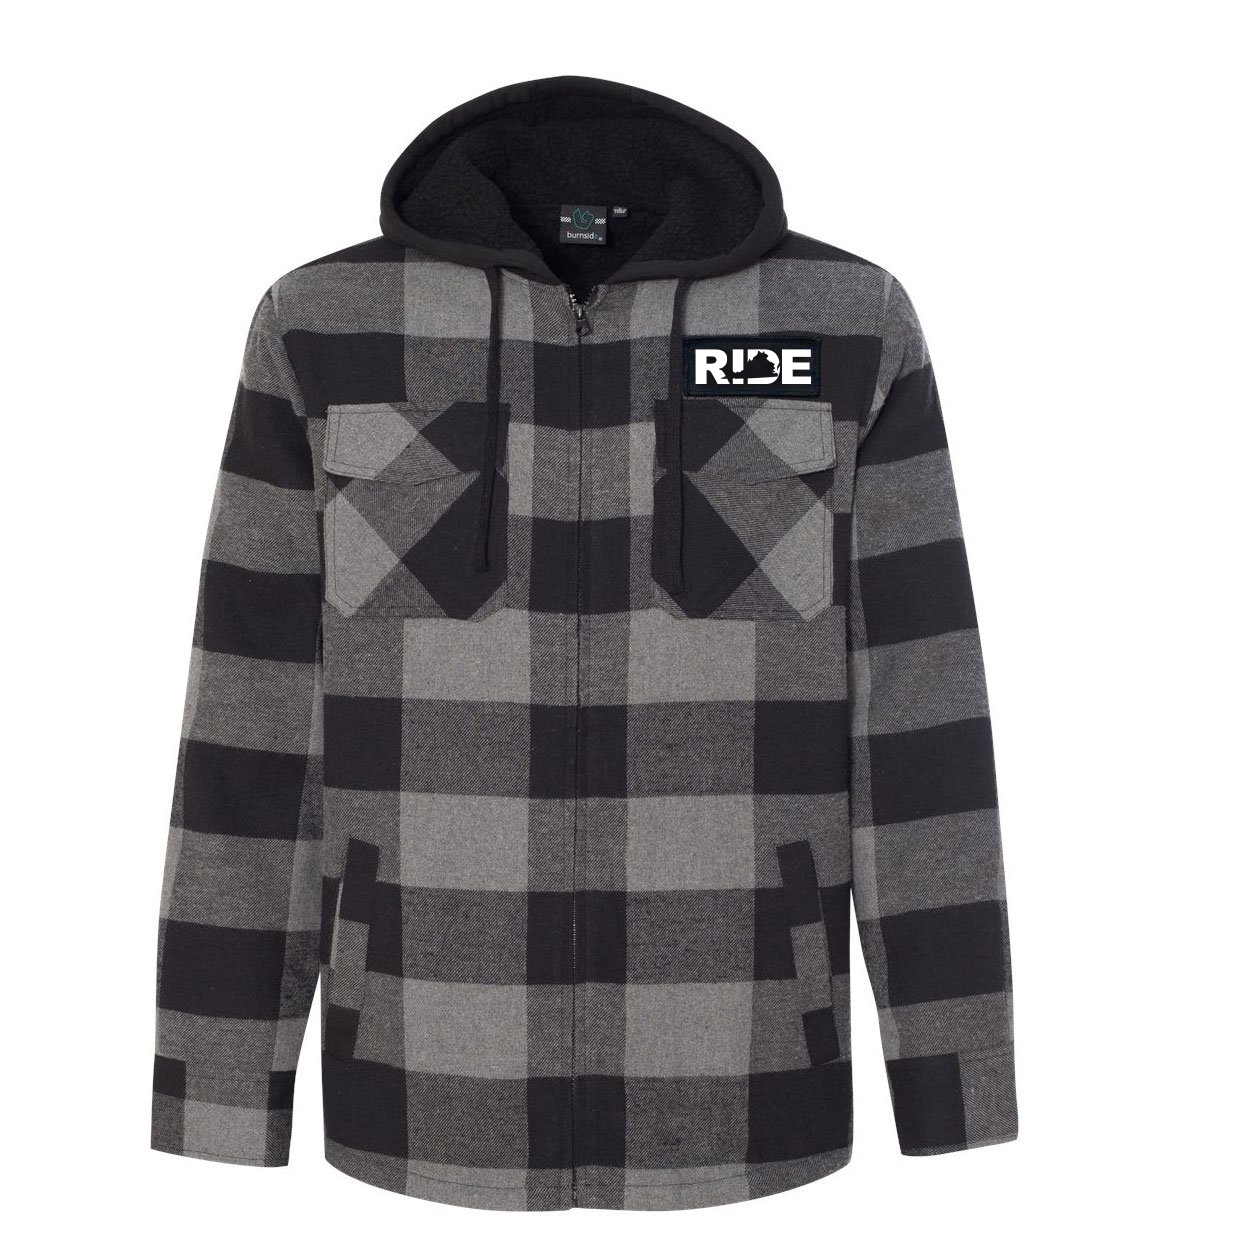 Ride Virginia Classic Unisex Full Zip Woven Patch Hooded Flannel Jacket Black/Gray (White Logo)